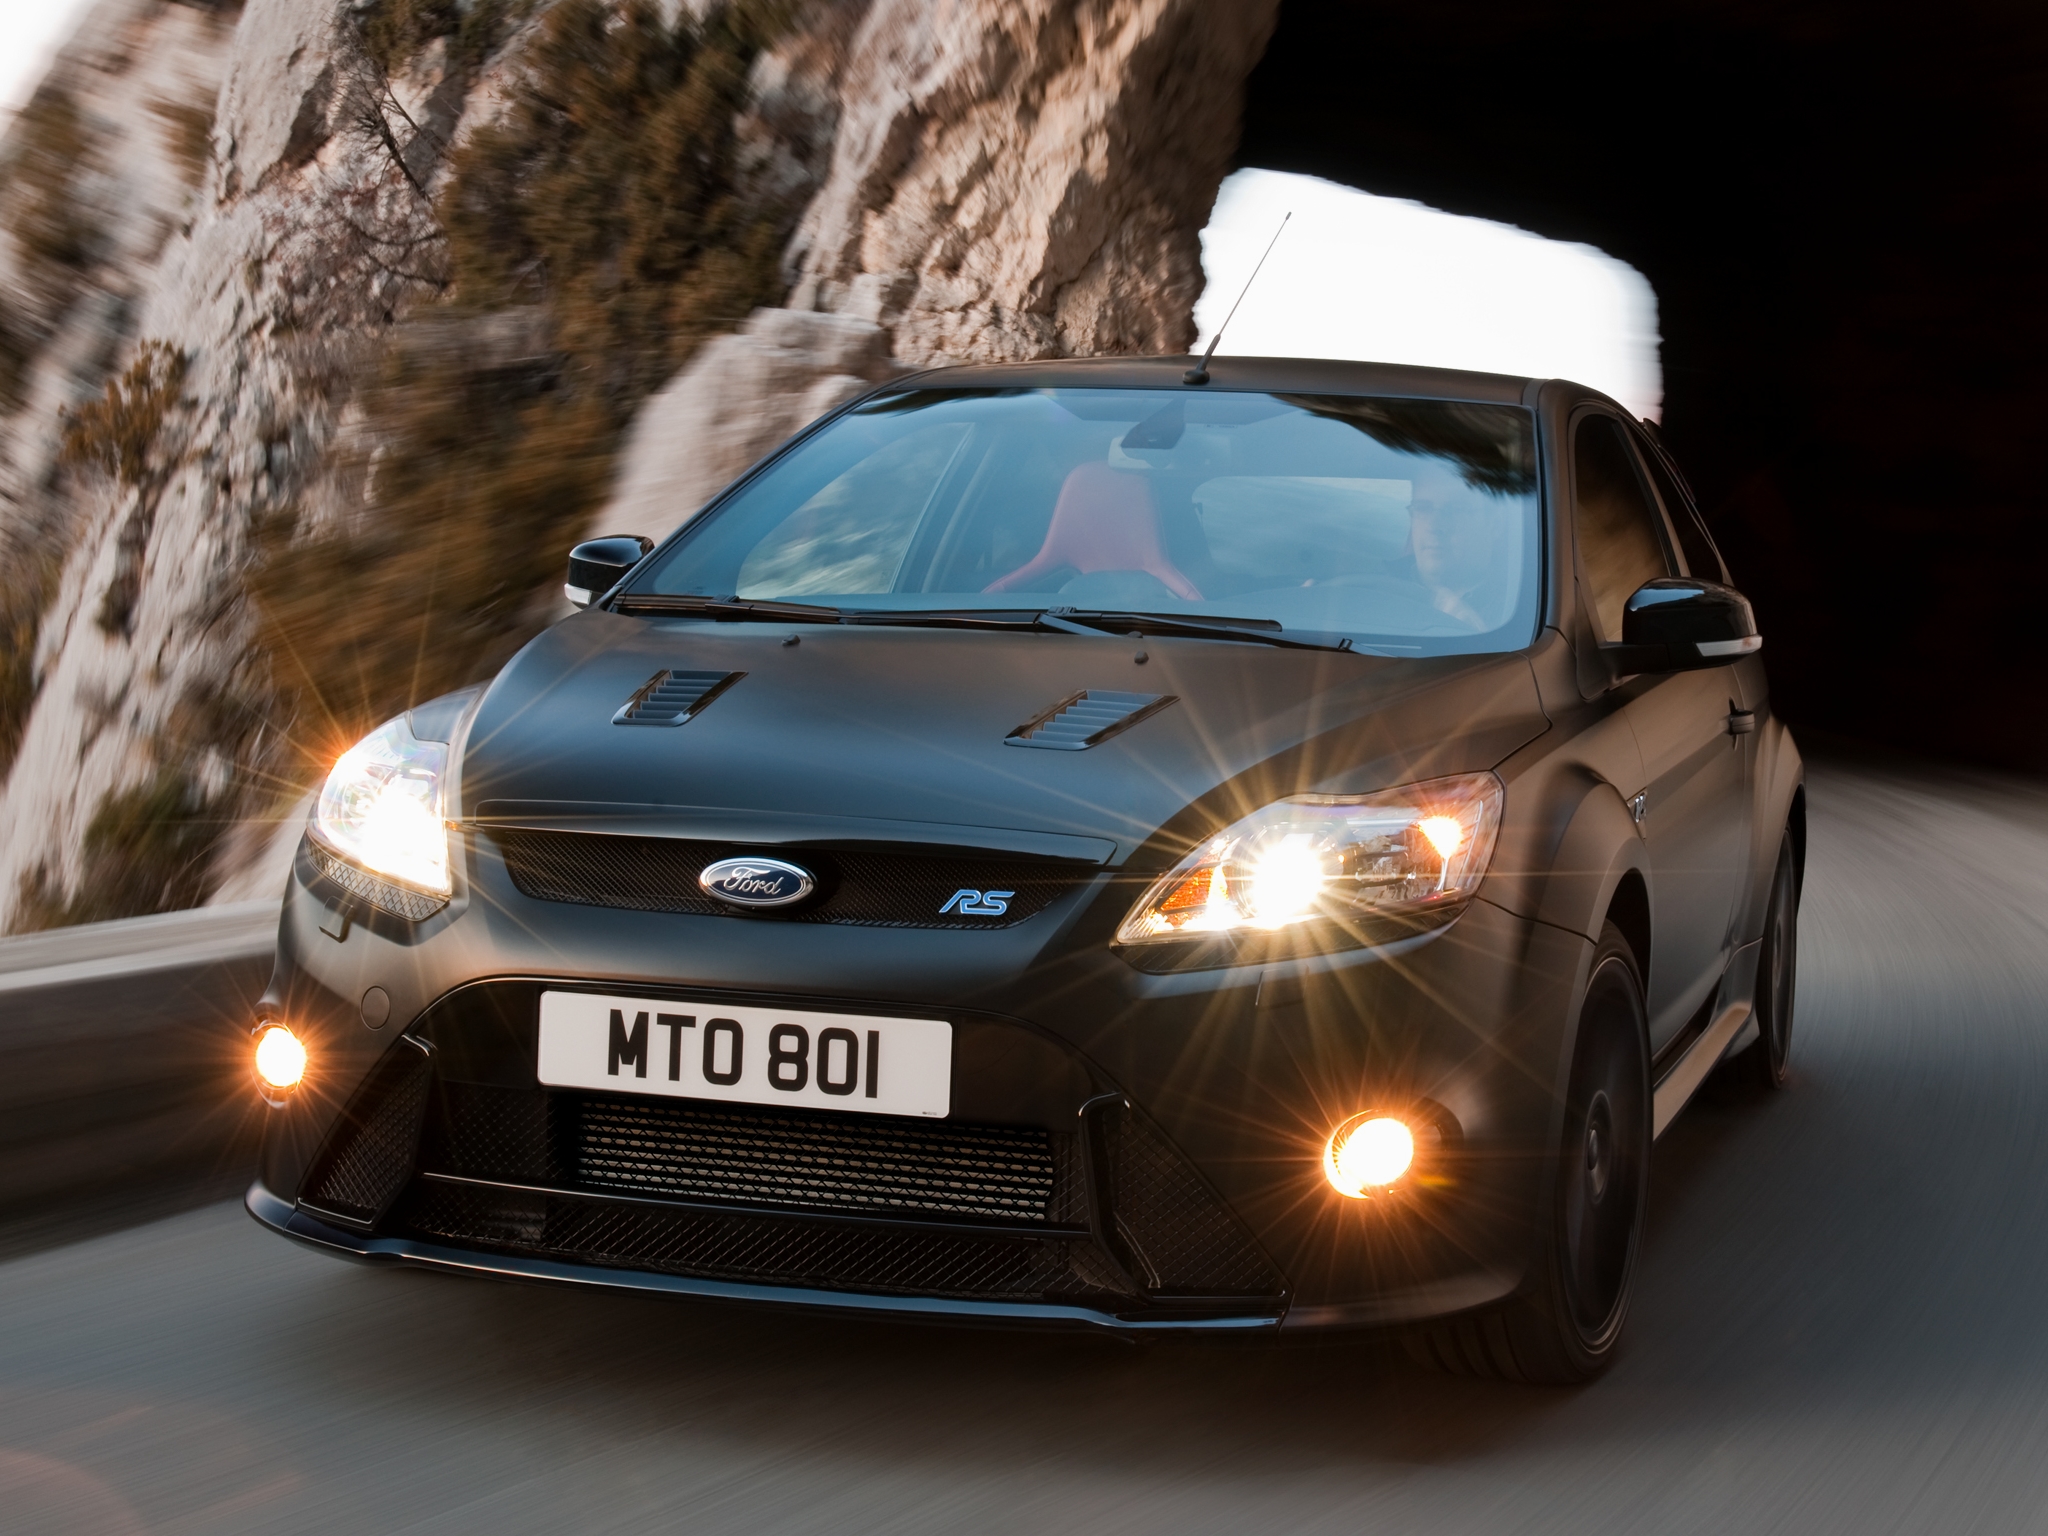  2010 Ford Focus RS500 Wallpaper.